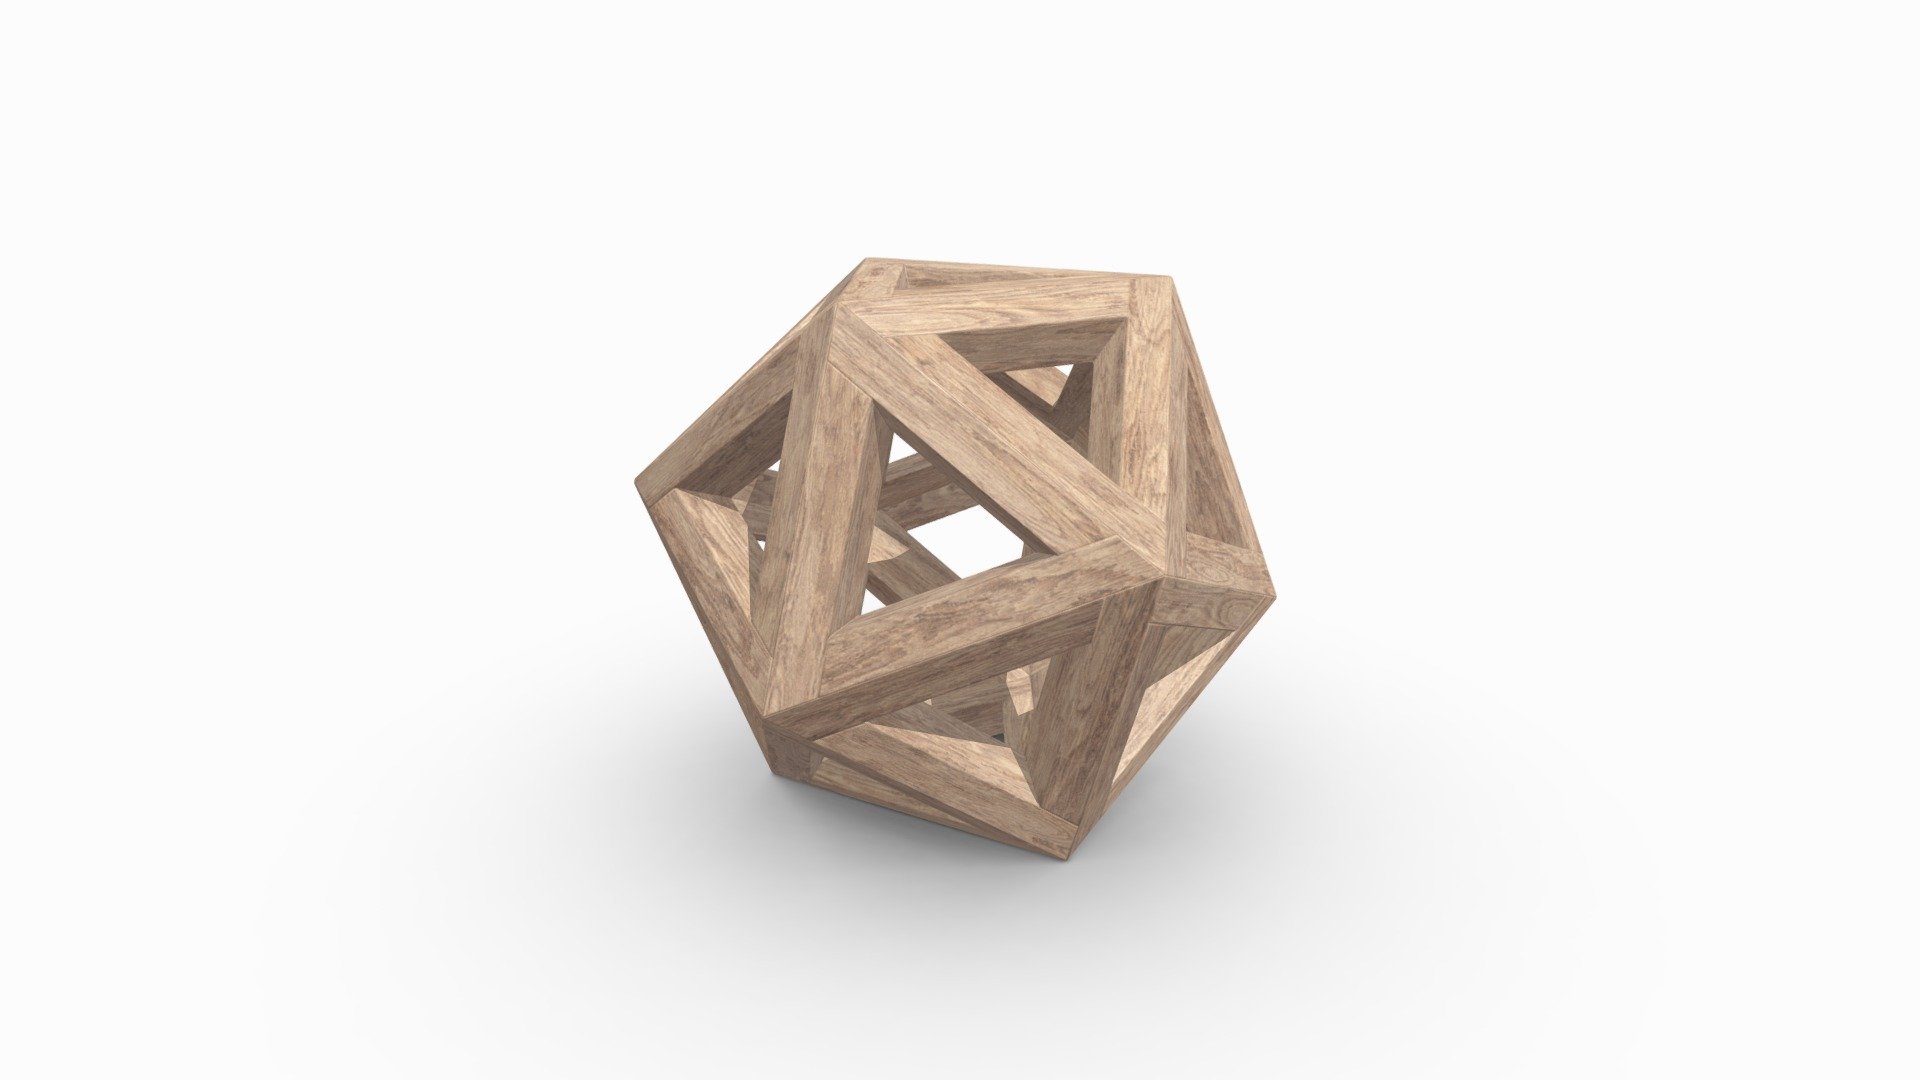 An icosahedron made of wood, for interior decoration. Approximately 20cm in diameter.

Geometry:




Quads/tris only

Not subdividable

Smooth shading with custom vertex normal data

Modelled to real-world scale, units: metres

Composed of 1 object and 1 watertight mesh

Textures:




Baked PBR textures, color, normal, roughness.

4096x4096 resolution (4K)

png format

Fully UV mapped with no overlap

Created in Blender. .blend and .fbx files have textures packed (embedded in the file) 3d model